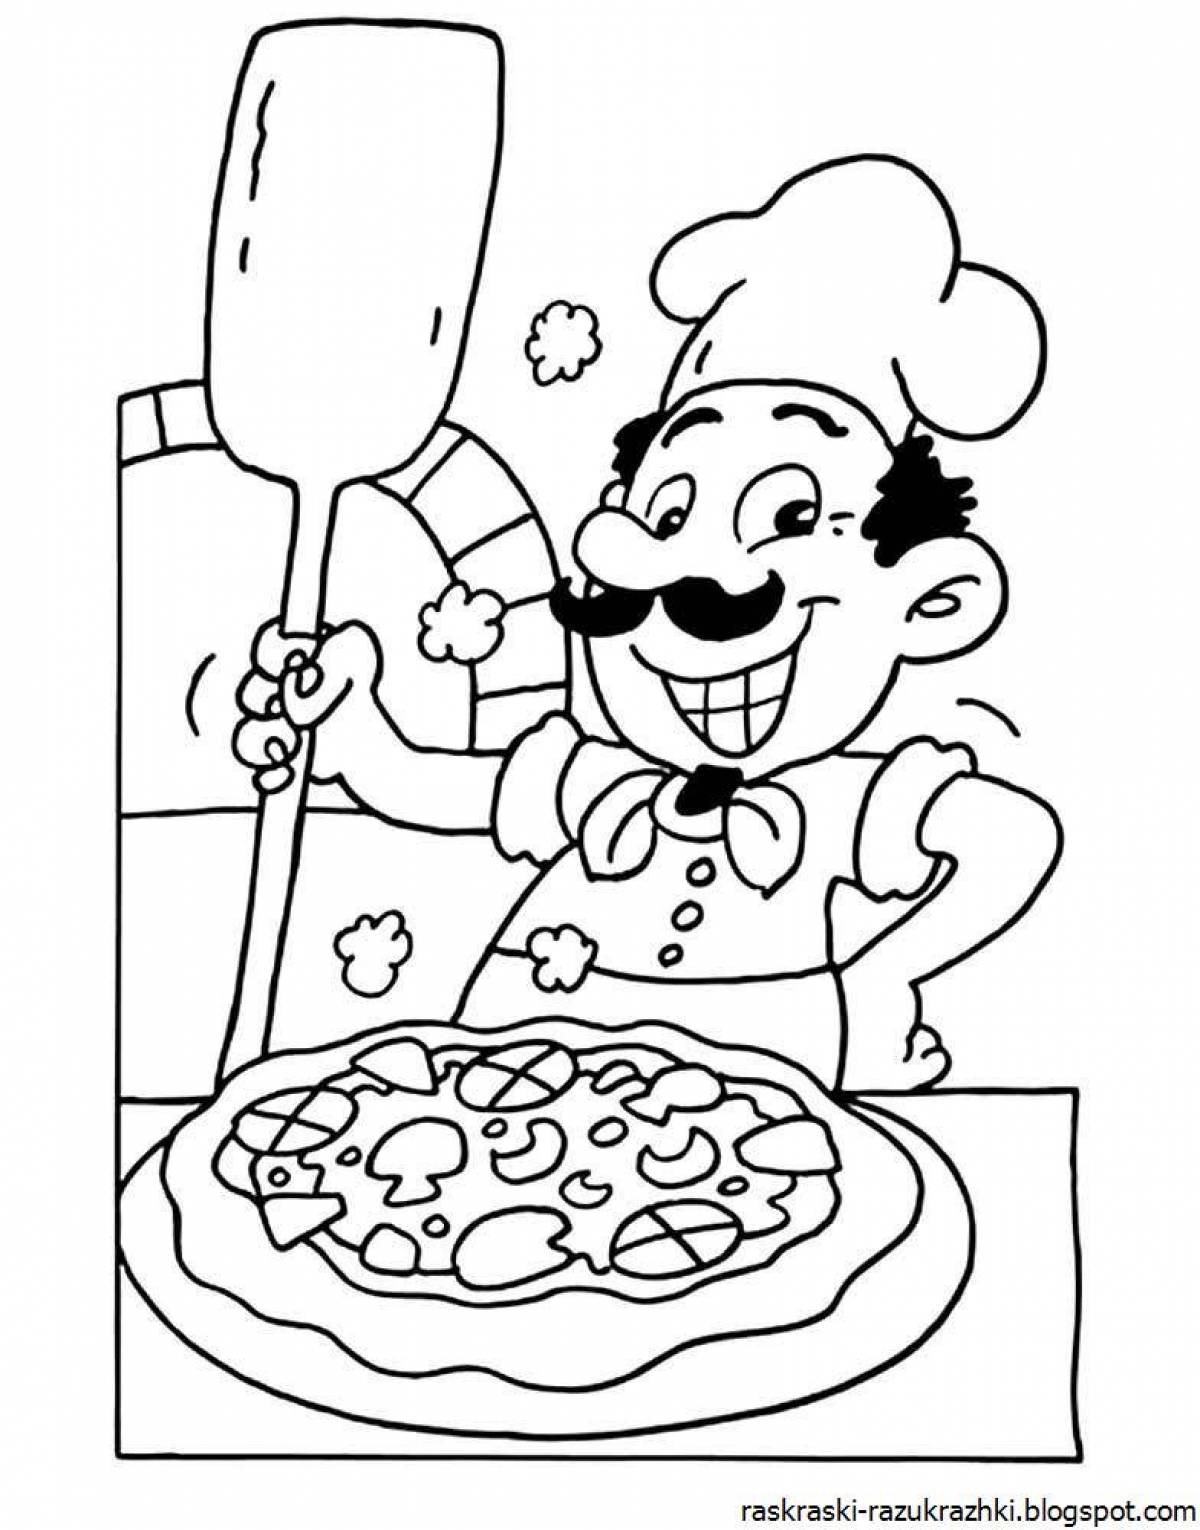 Fun cooking coloring book for kids